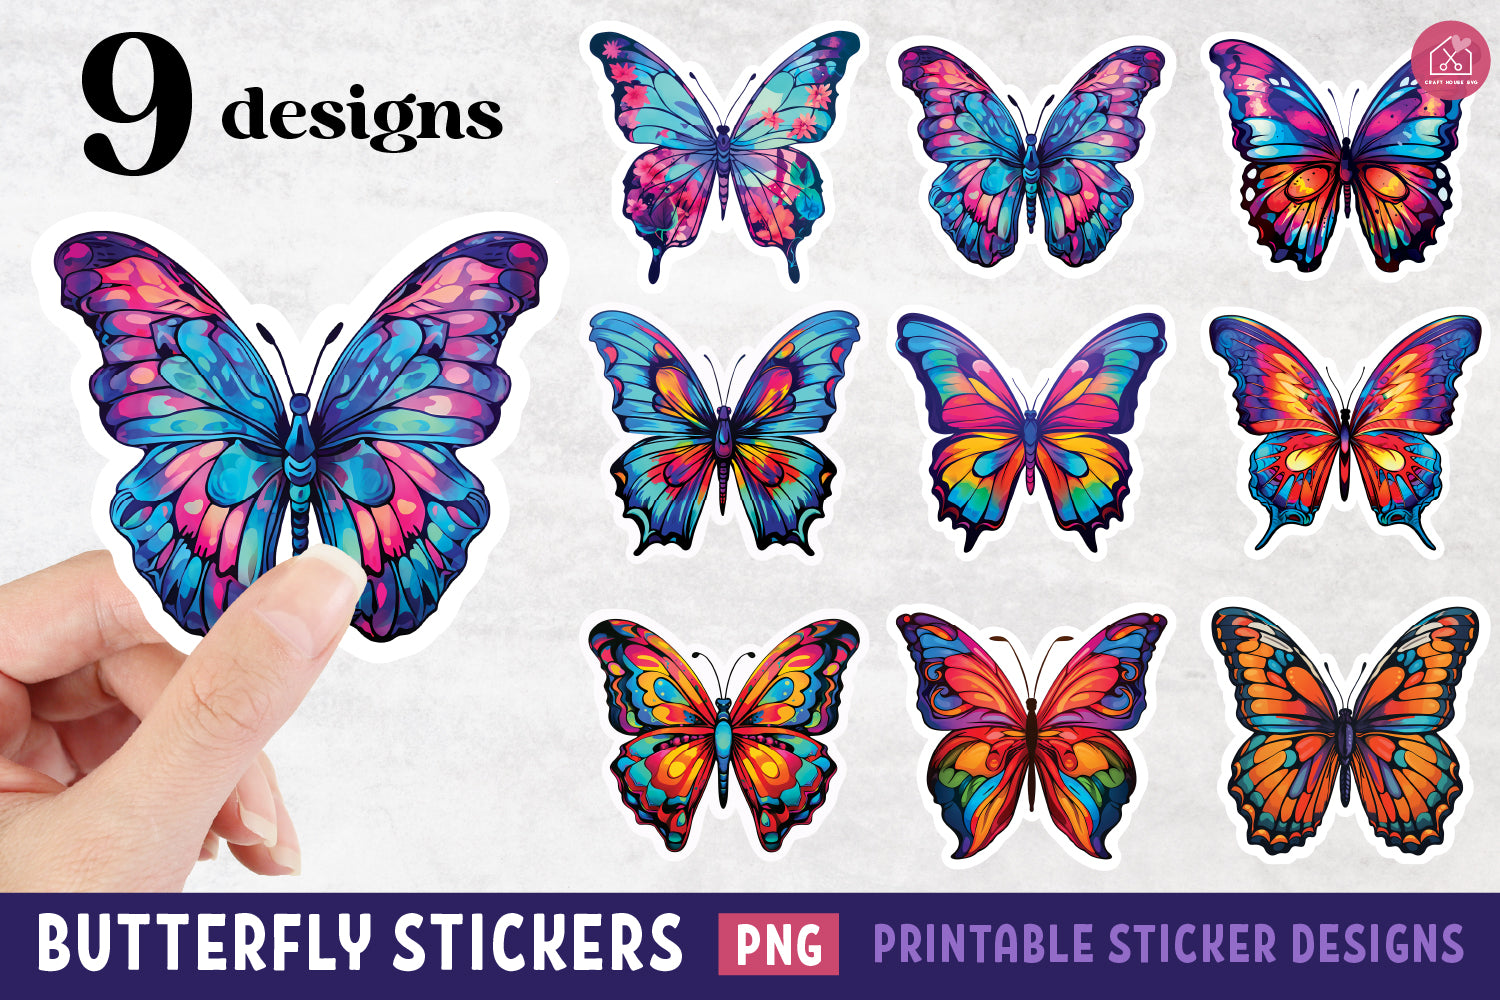 Butterfly Stickers PNG Print and Cut Sticker Designs